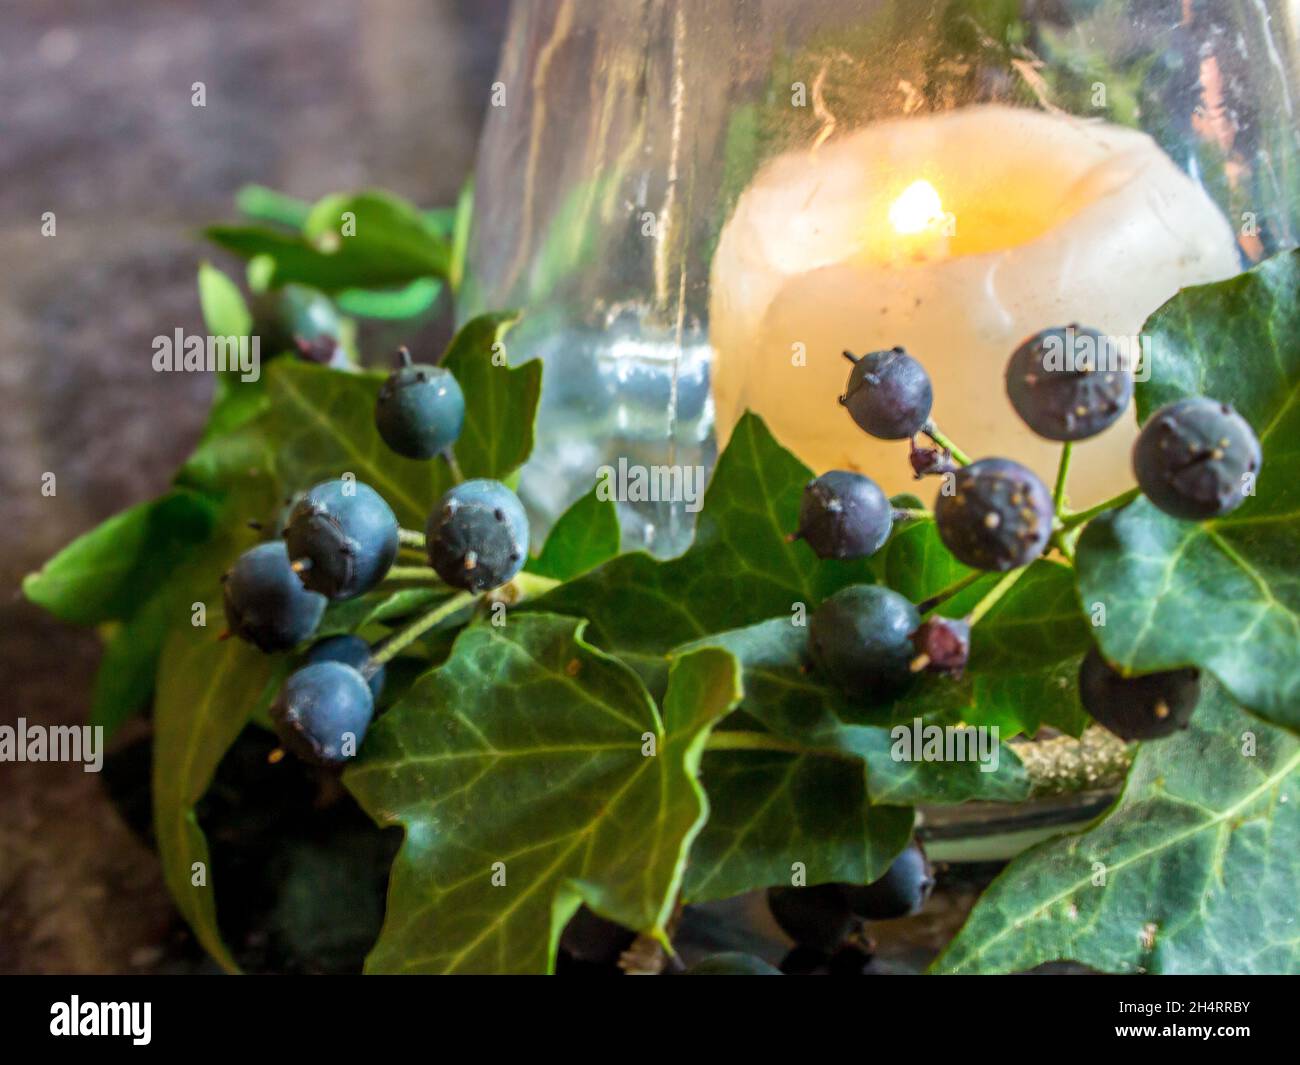 Close-up view of a burning Candle, surrounded by the blueish-black berries and dark green leaves of an Ivy vine, Hedera Hibernica. Stock Photo